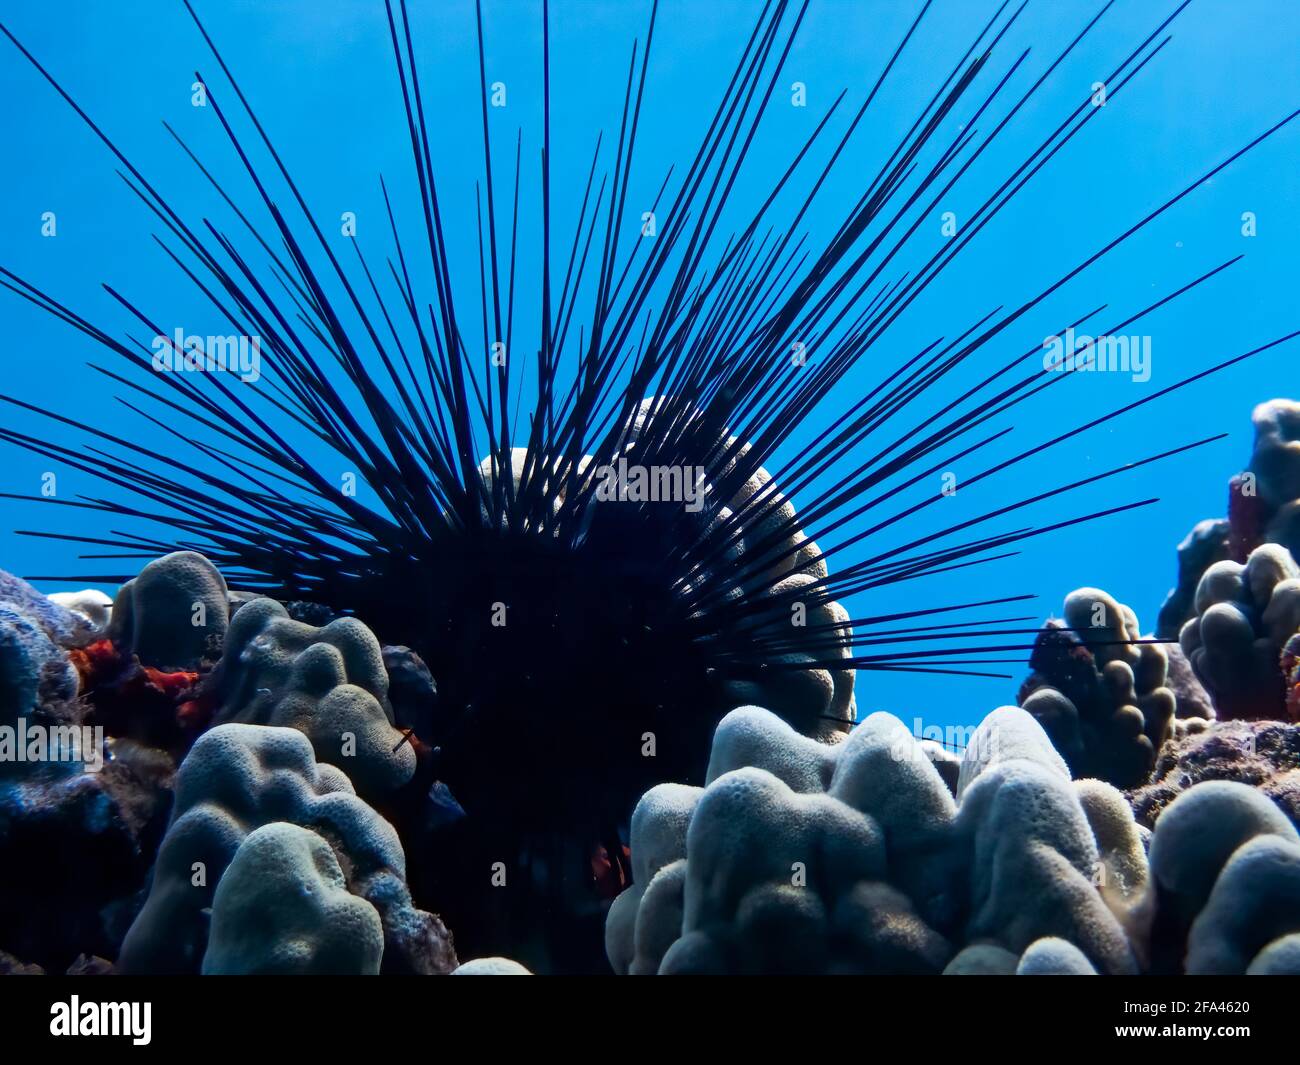 Black long spined sea urchin close up sitting among coral with blue water background. Stock Photo